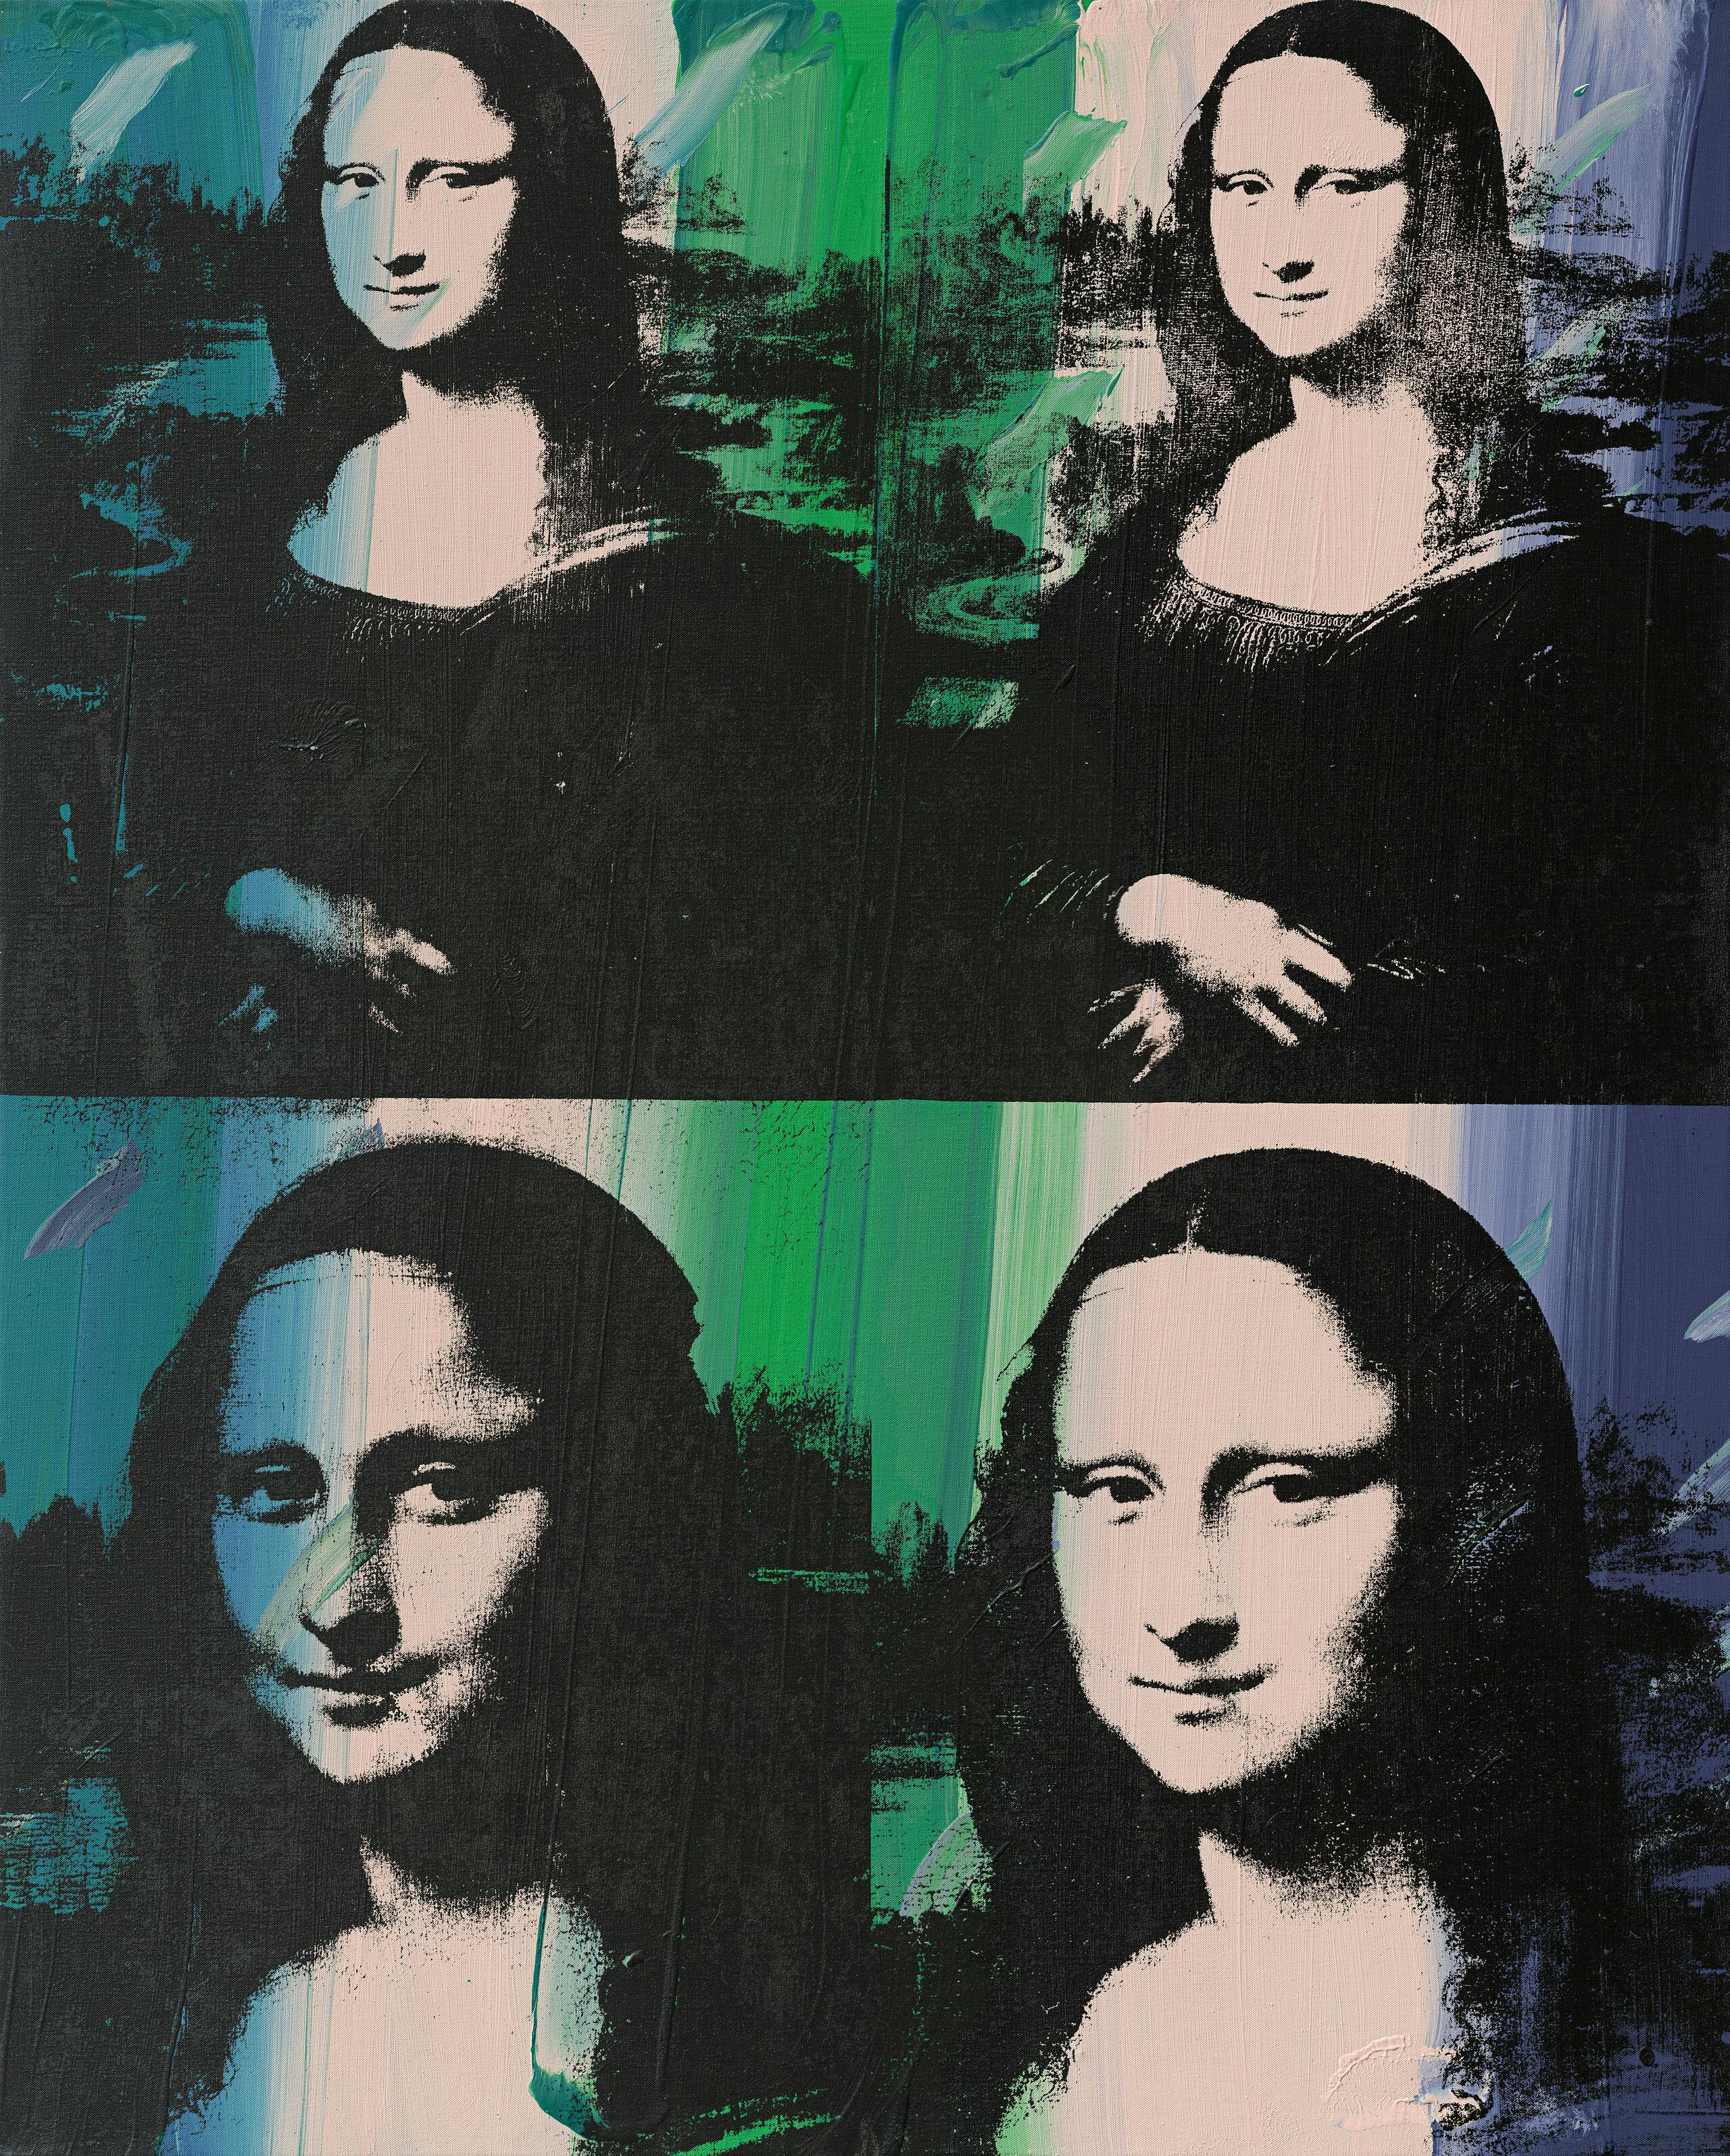 Color print: the famous Mona Lisa by Leonardo da Vinci is depicted four times: twice at the top and twice below. Large areas of color overlaid in shades of blue and green transform the painting.